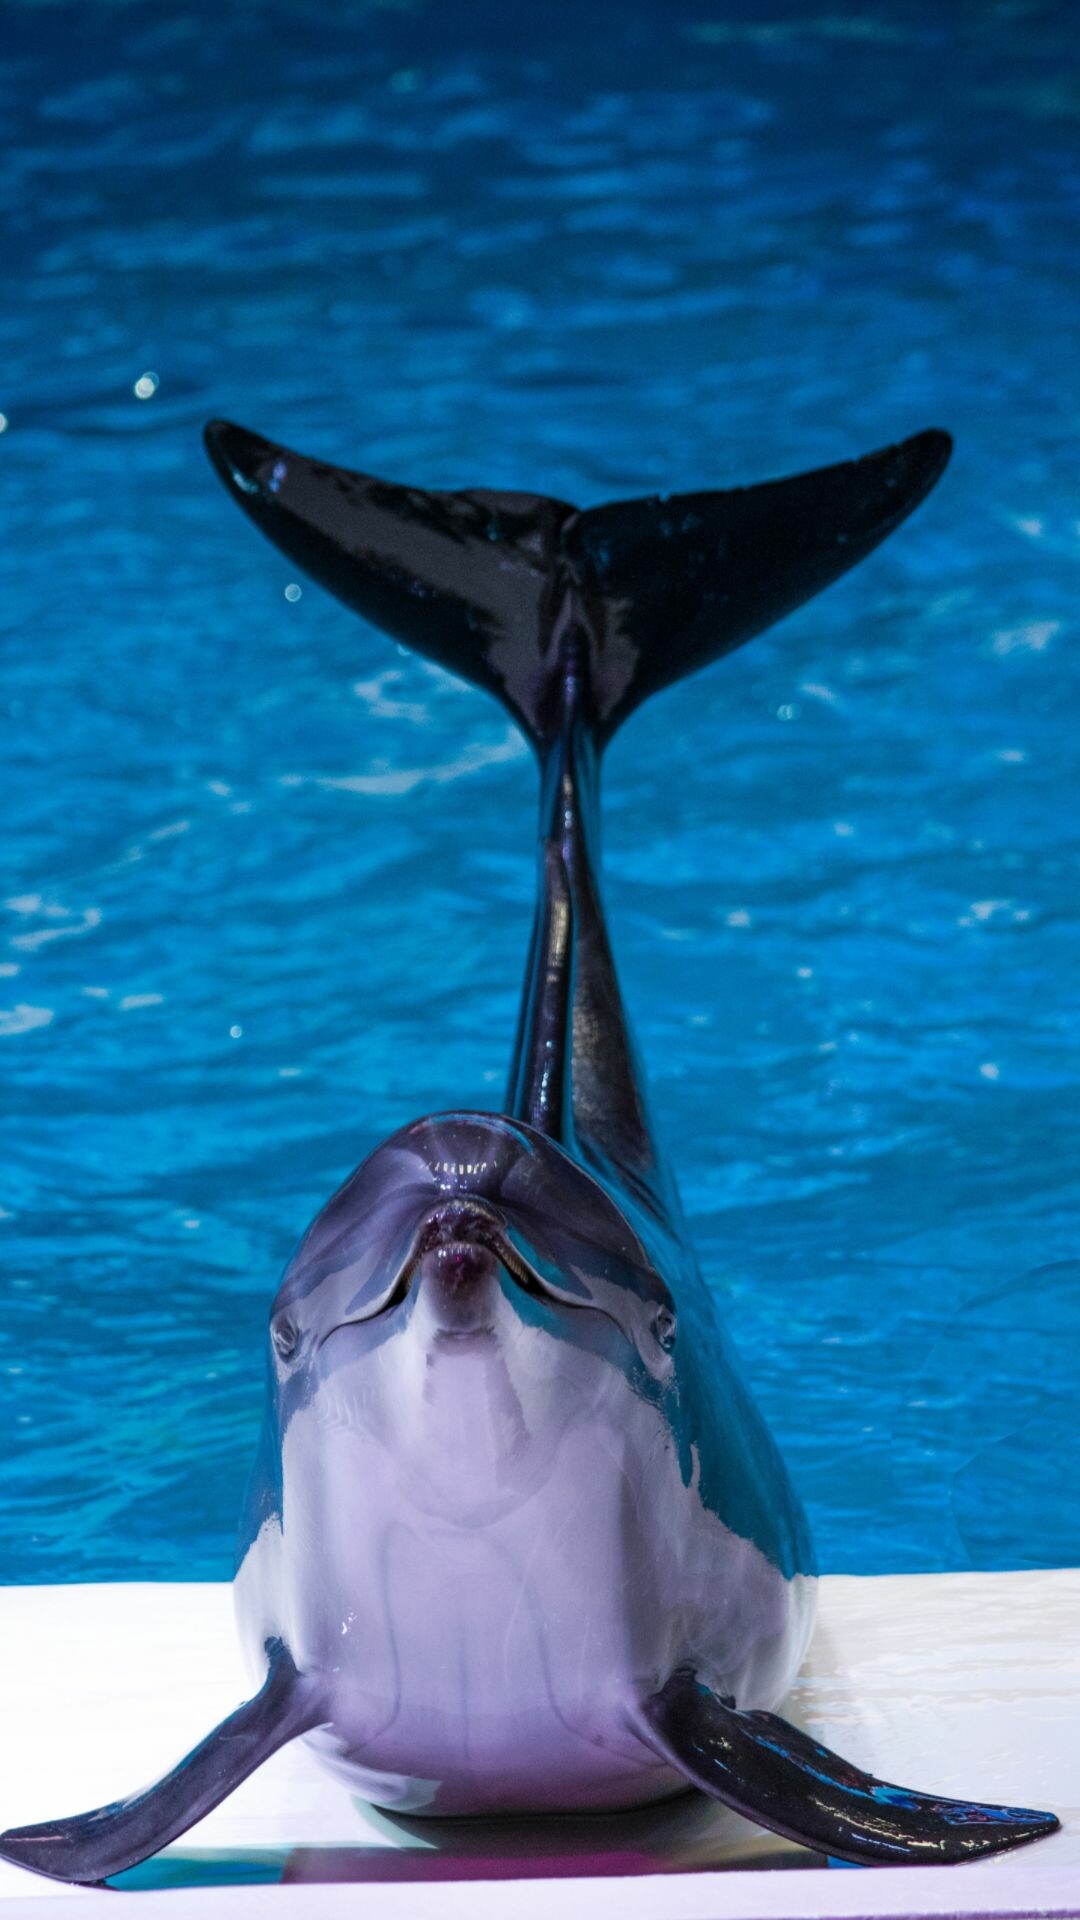 Dolphin: A mammal that needs to breathe air through its blowhole, just as whales and porpoises do. 1080x1920 Full HD Background.